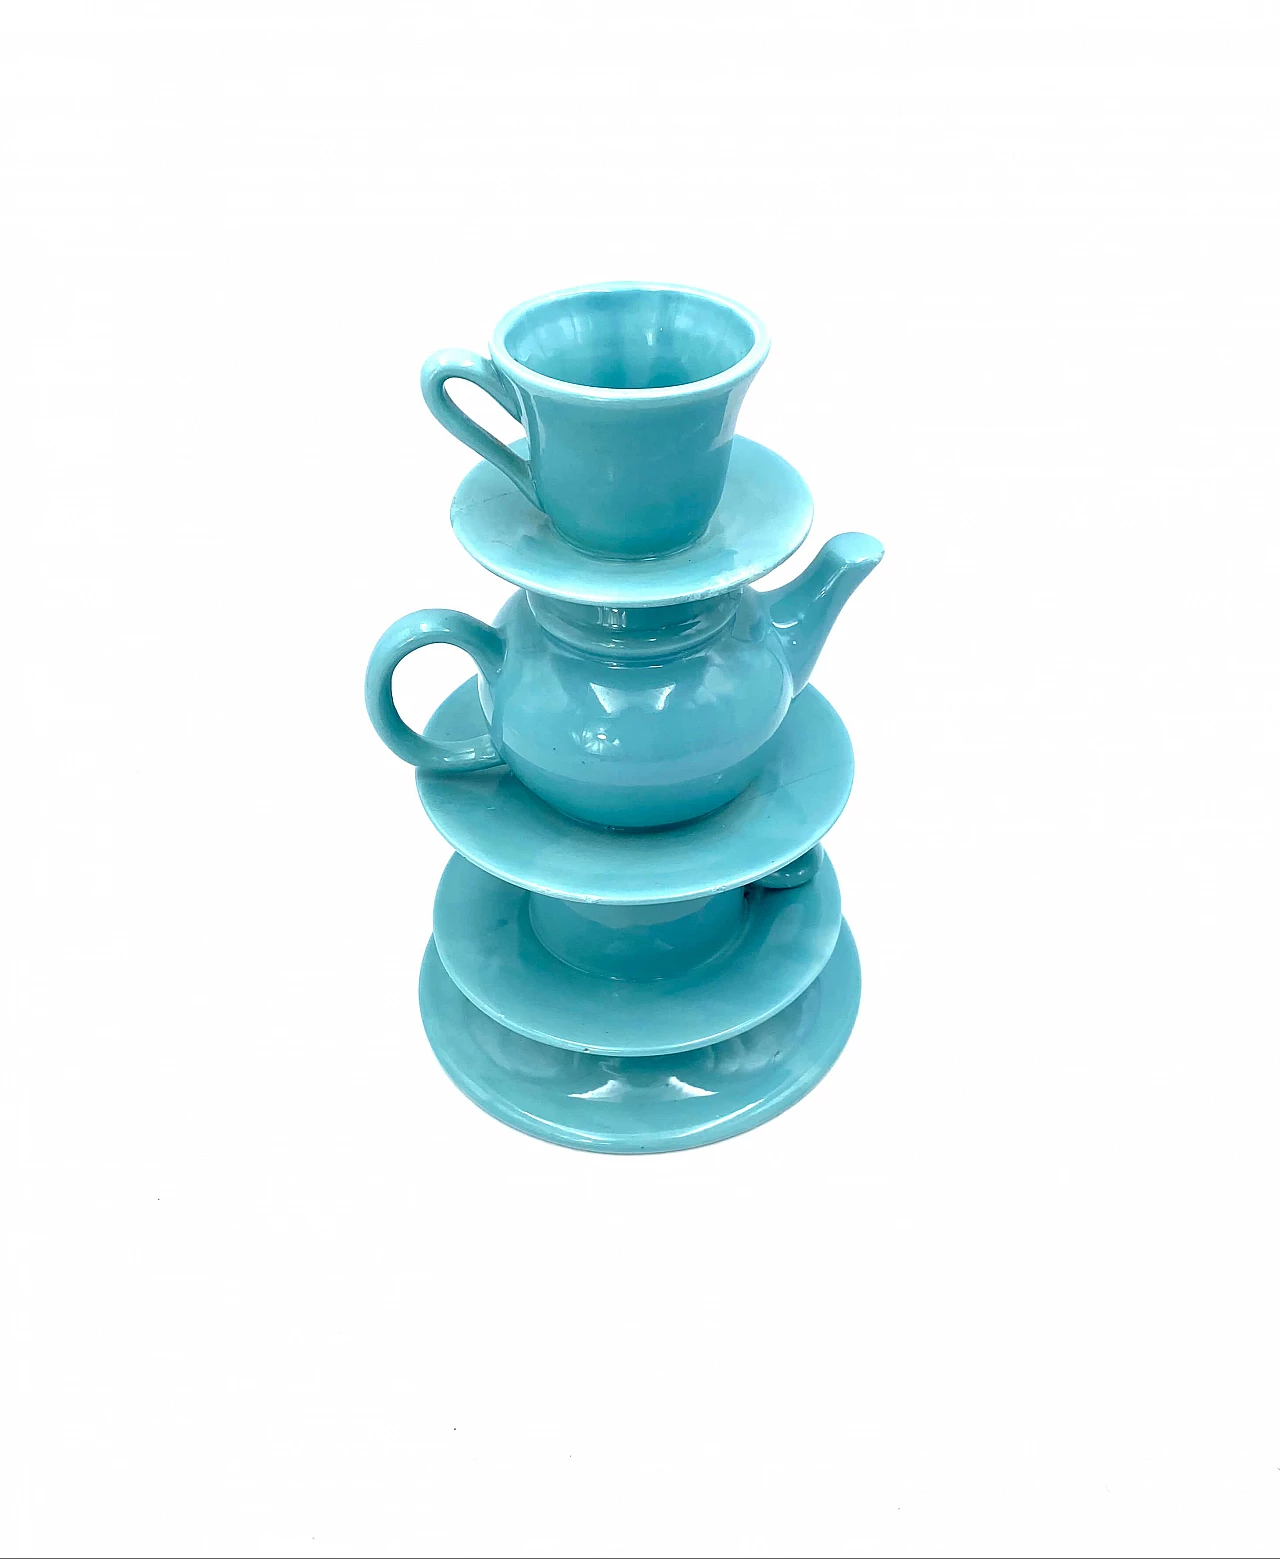 Vase in the shape of stacked blue teacups, 80s 1251796